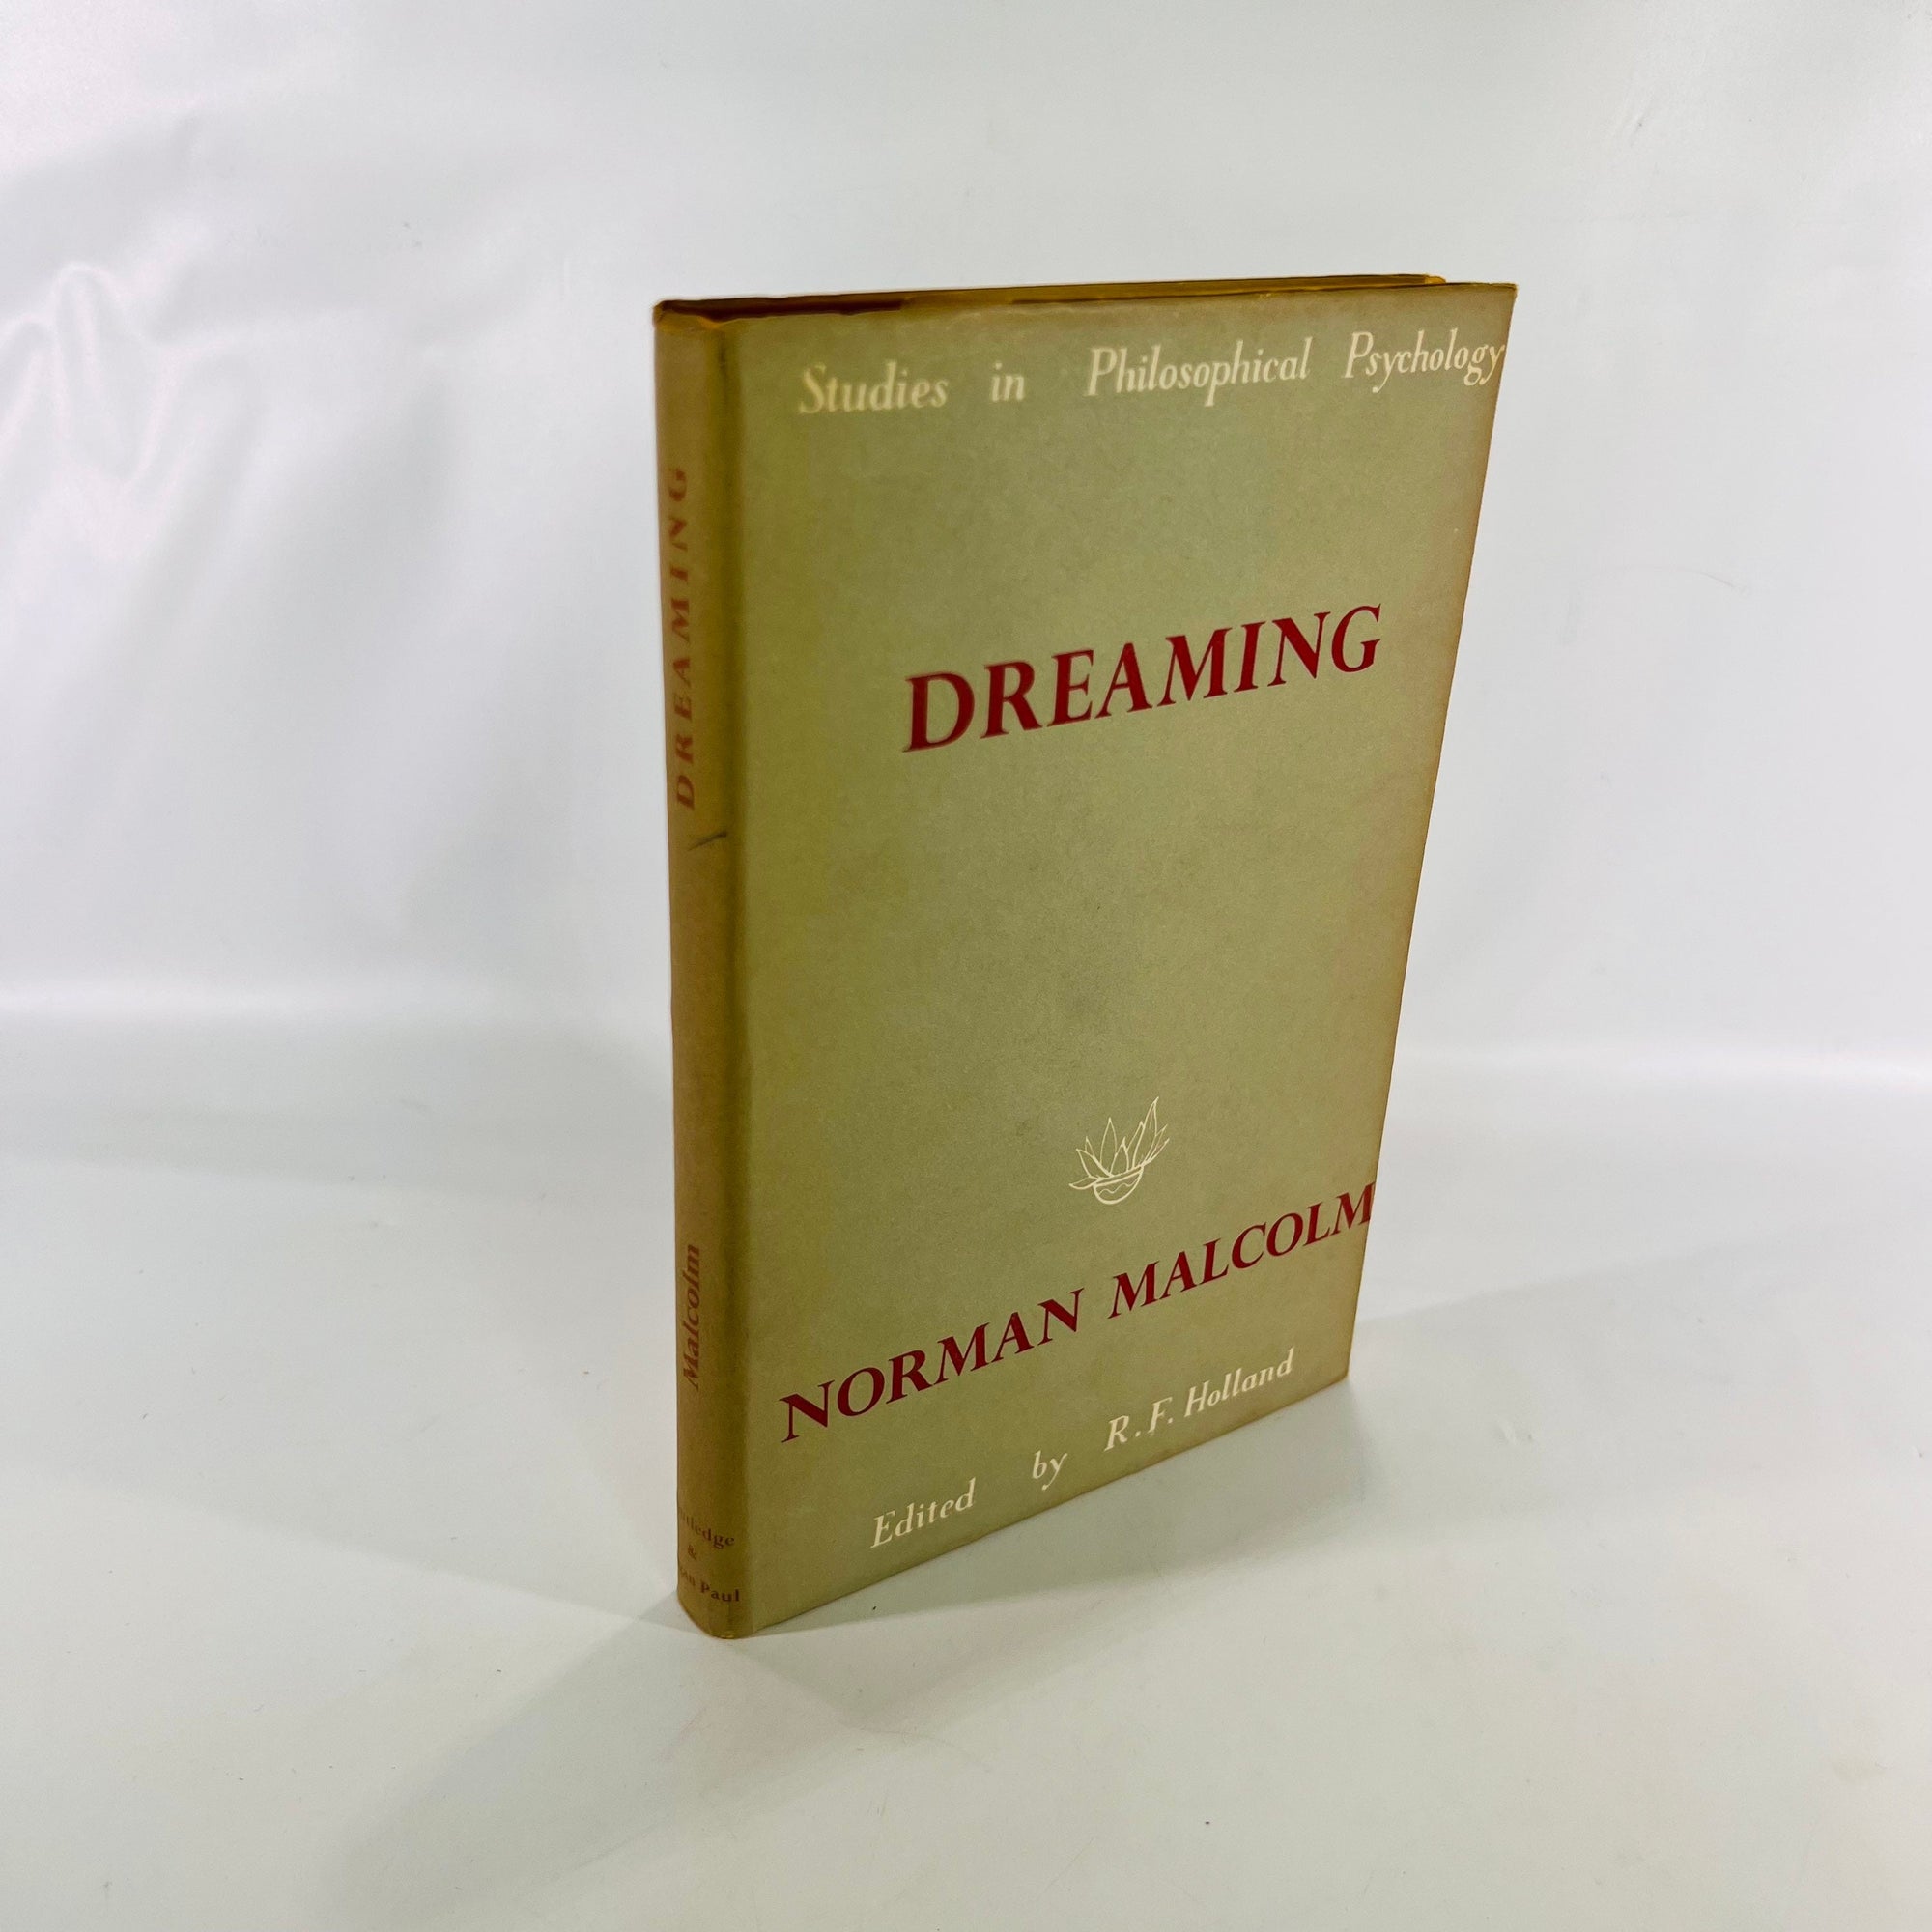 Dreaming Studies in Philosophical Psychology by Norman Malcolm 1962 Humanities Press Vintage Medical Book